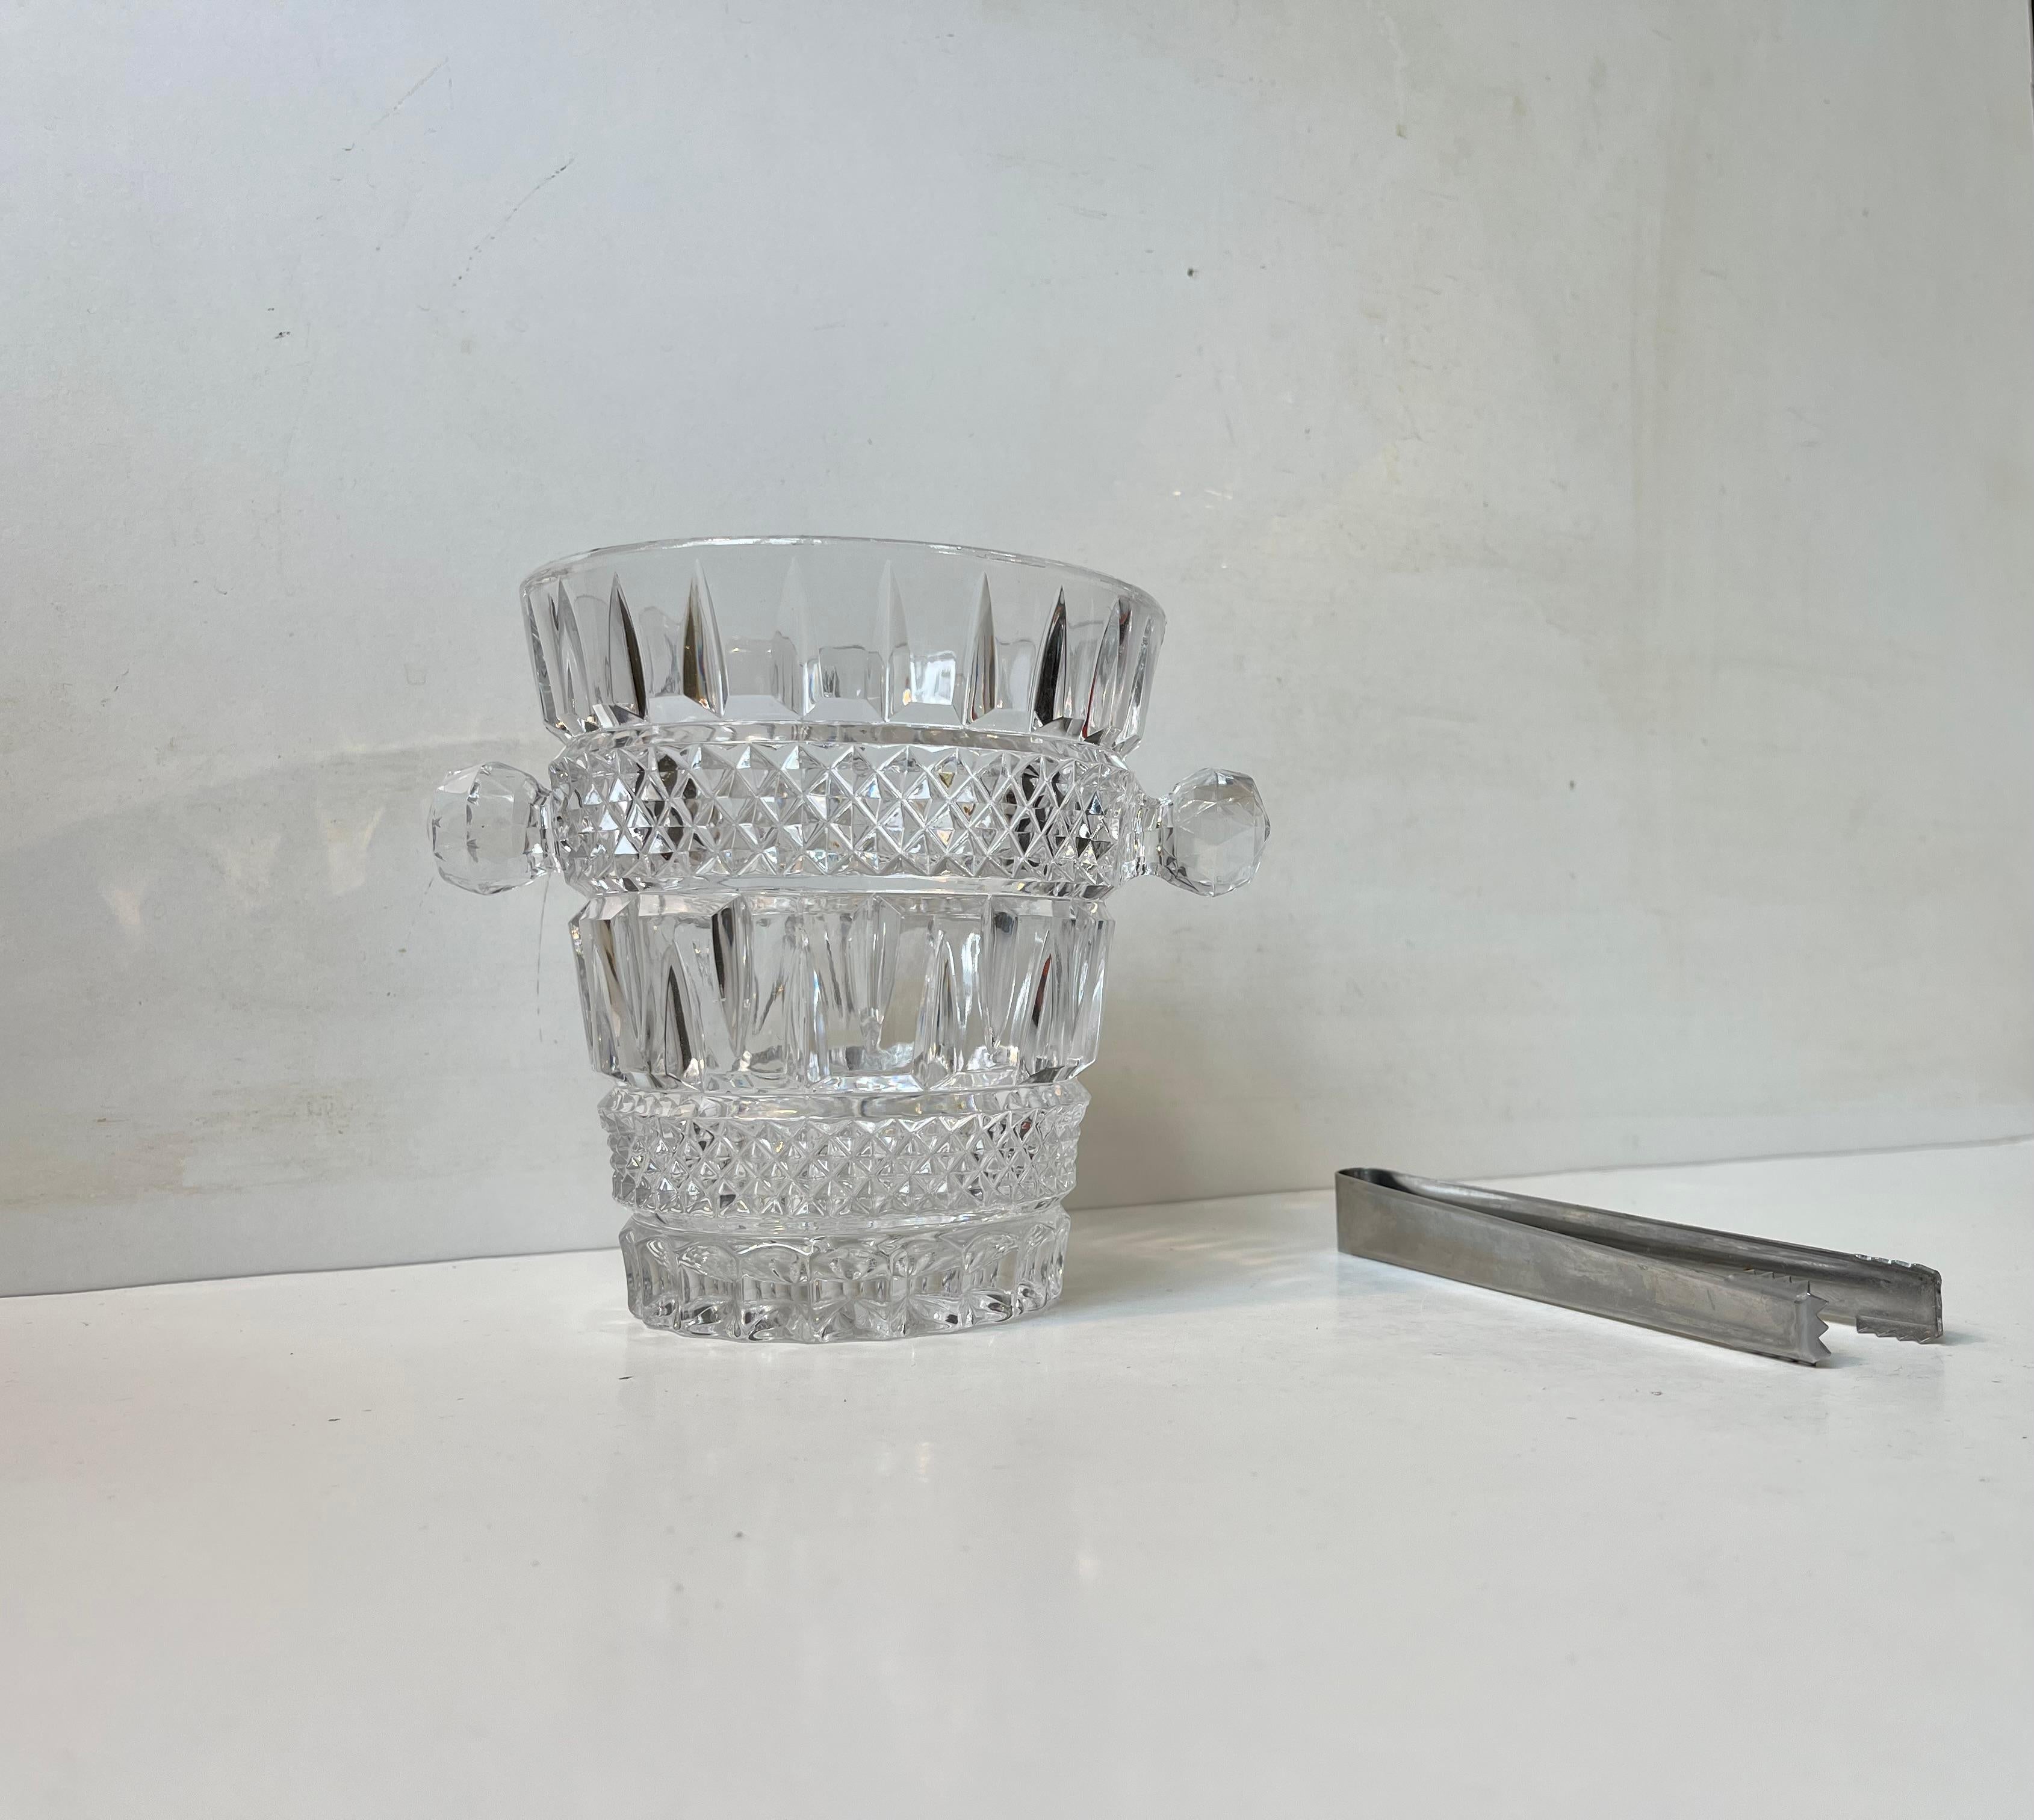 A stylish ice bucket featuring multiple facts, diamond-patterns and decoratively cut handle nots. The Ice Bucket was made in Italy circa 1960-70. It comes with a period stainless steel ice tong. Measurements: H: 14 cm, D: 13 cm (without handles).